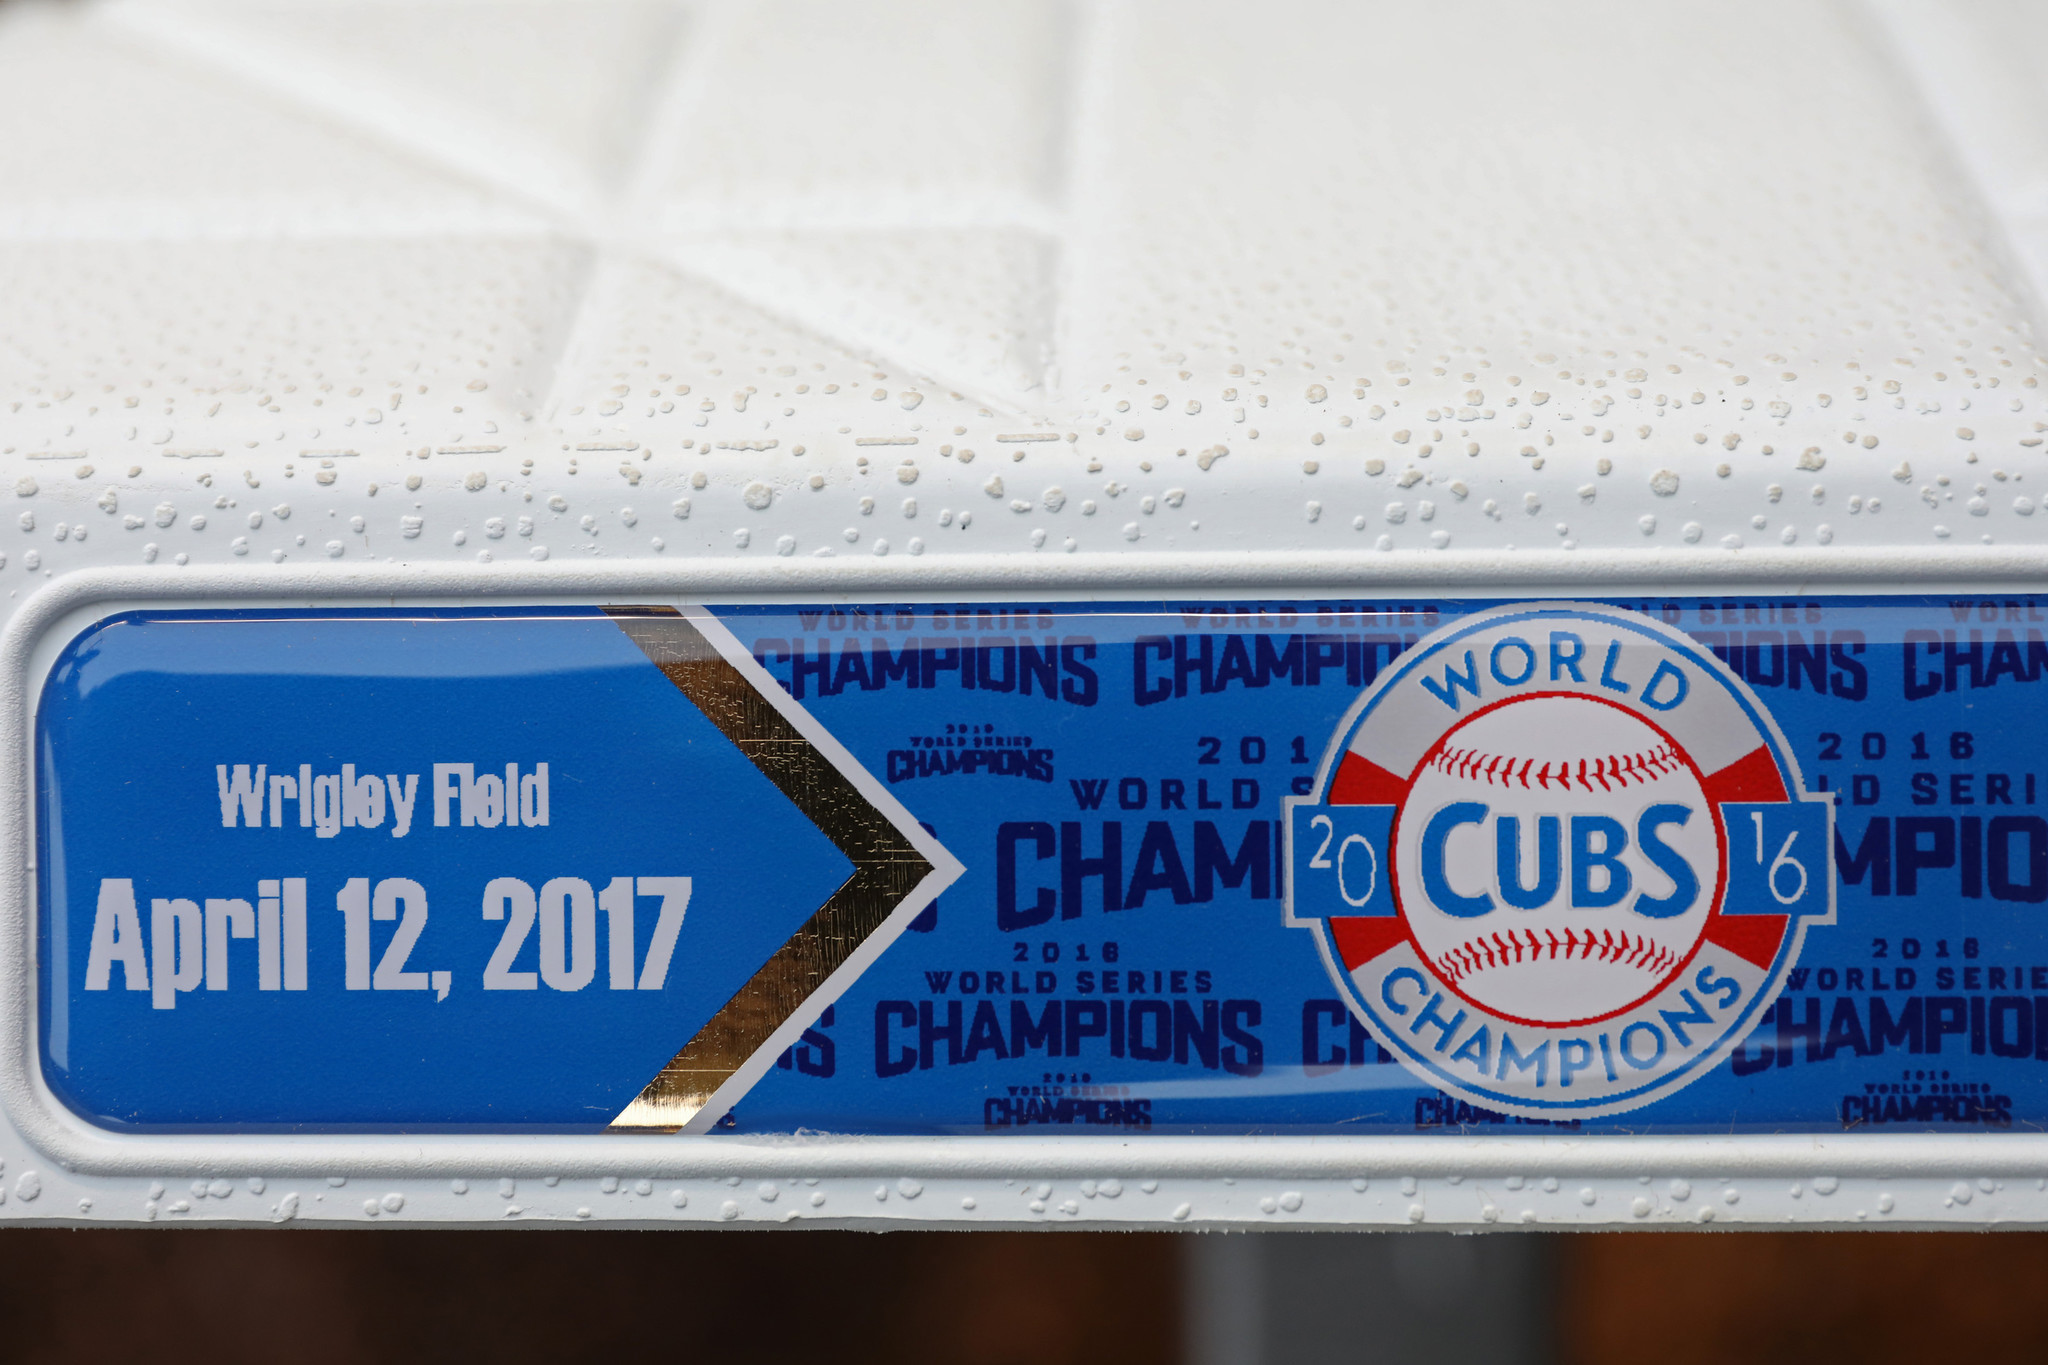 Ben Zobrist's Cubs 2016 World Series ring up for auction – NBC